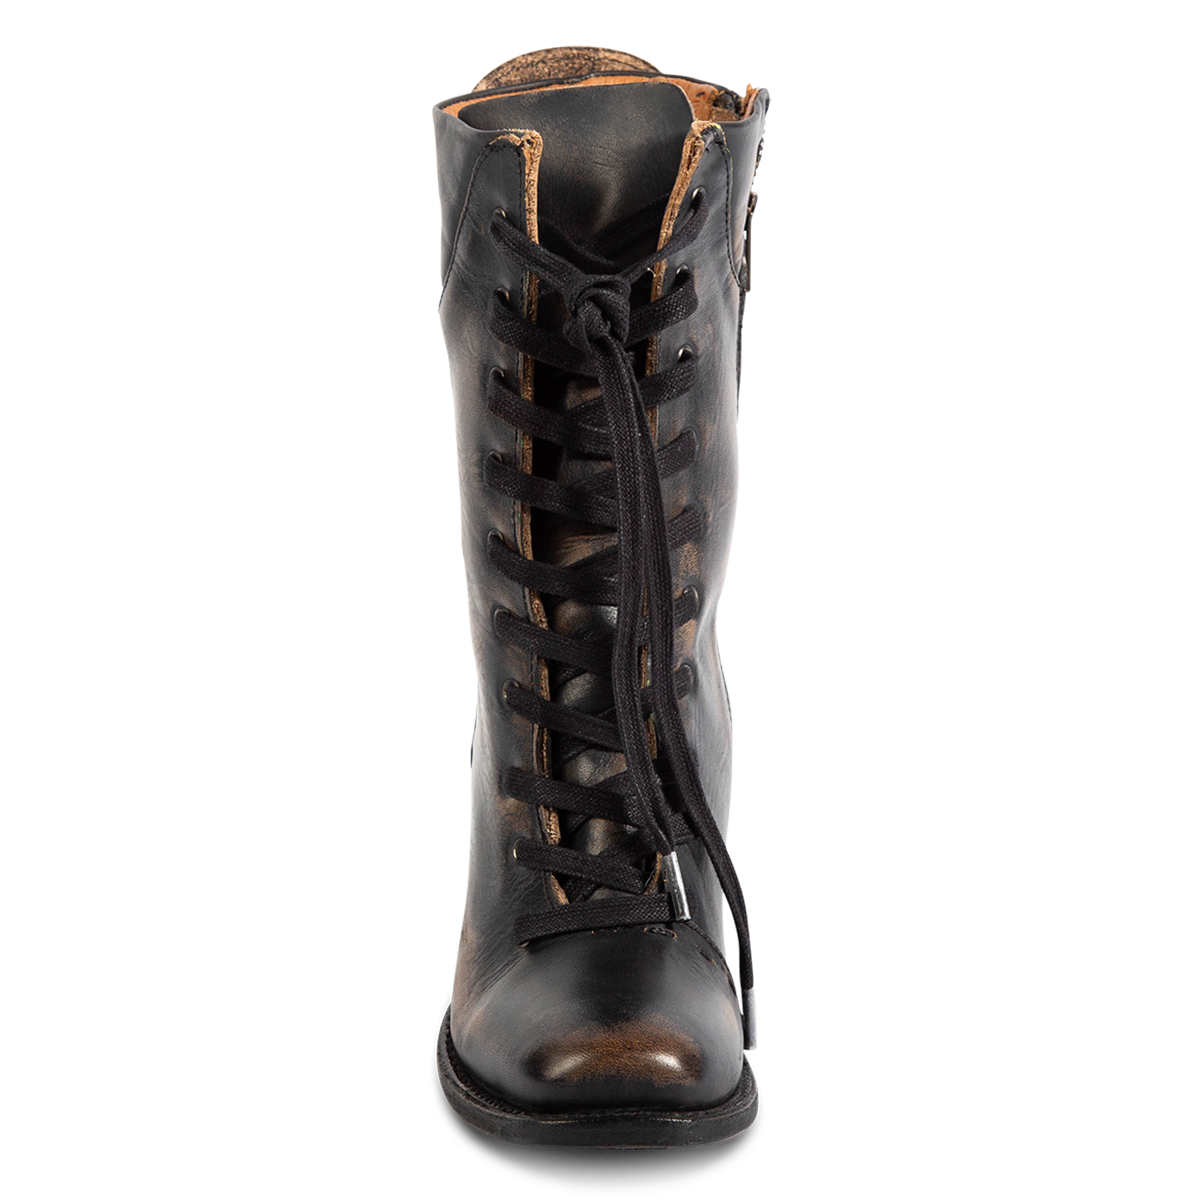 Front view showing front tie lacing and square toe on FREEBIRD women's Dart black leather boot